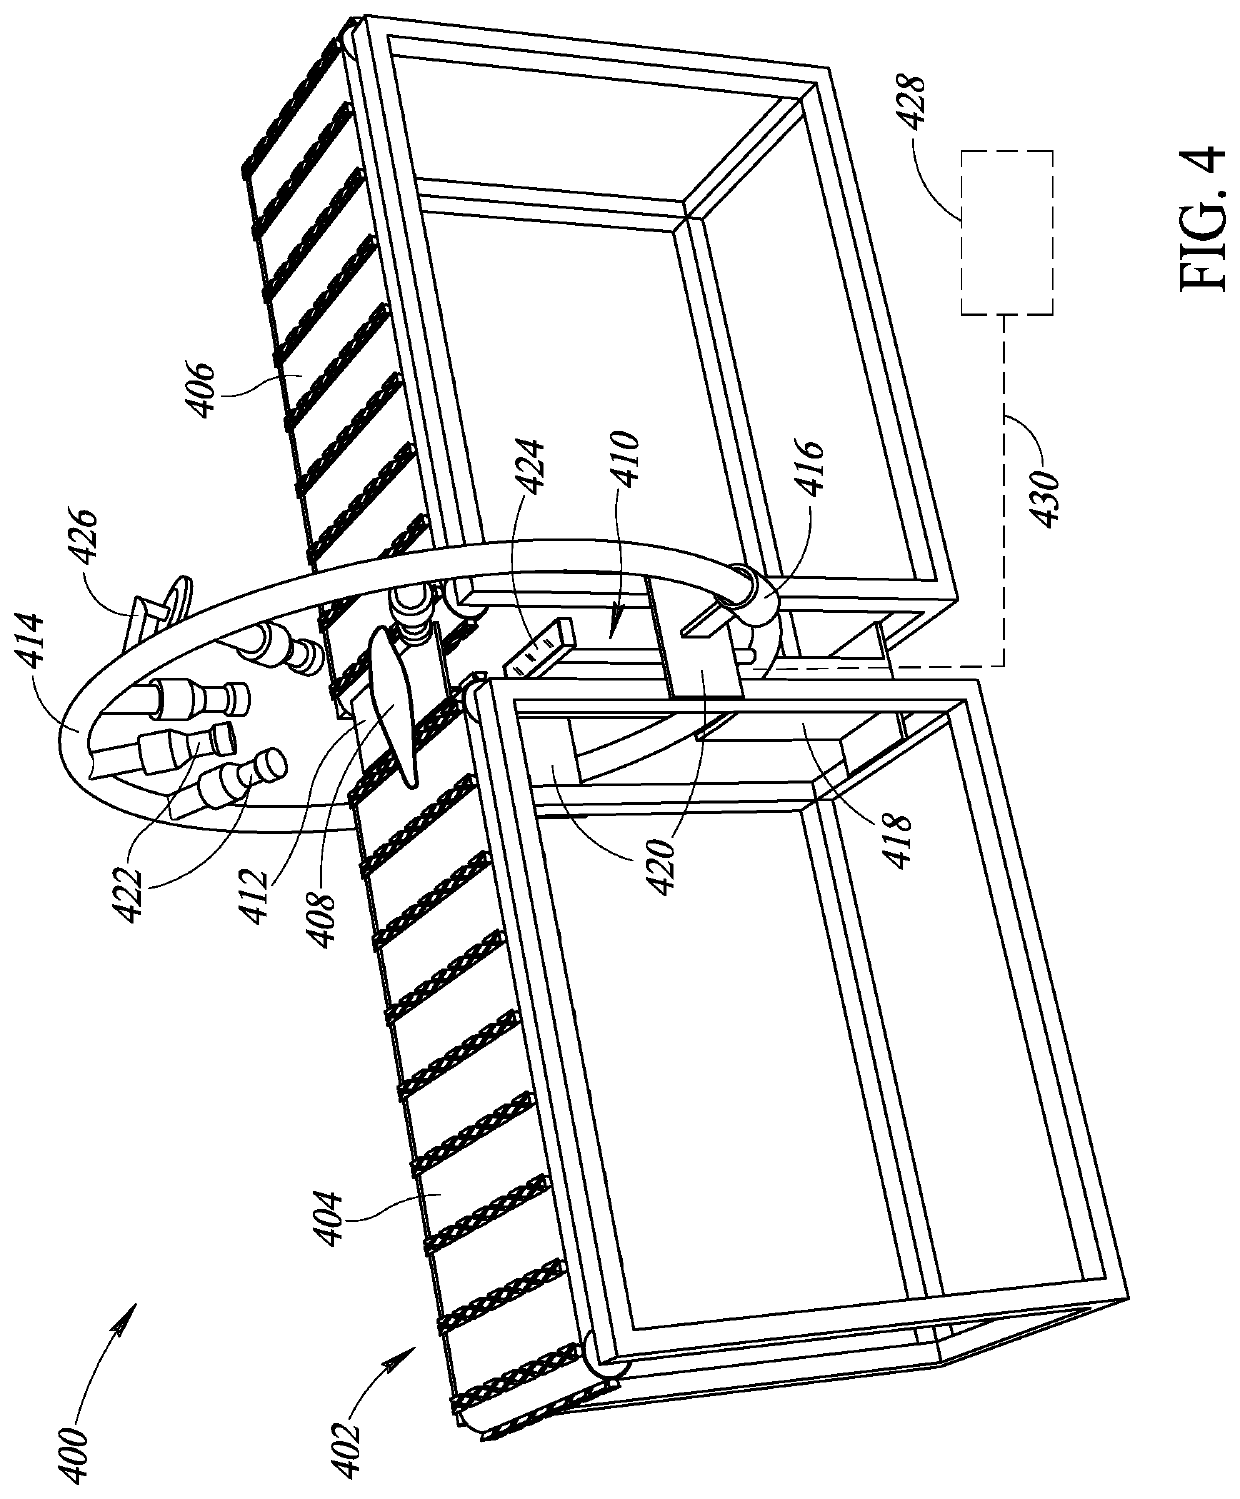 Multi-view imaging system and methods for non-invasive inspection in food processing